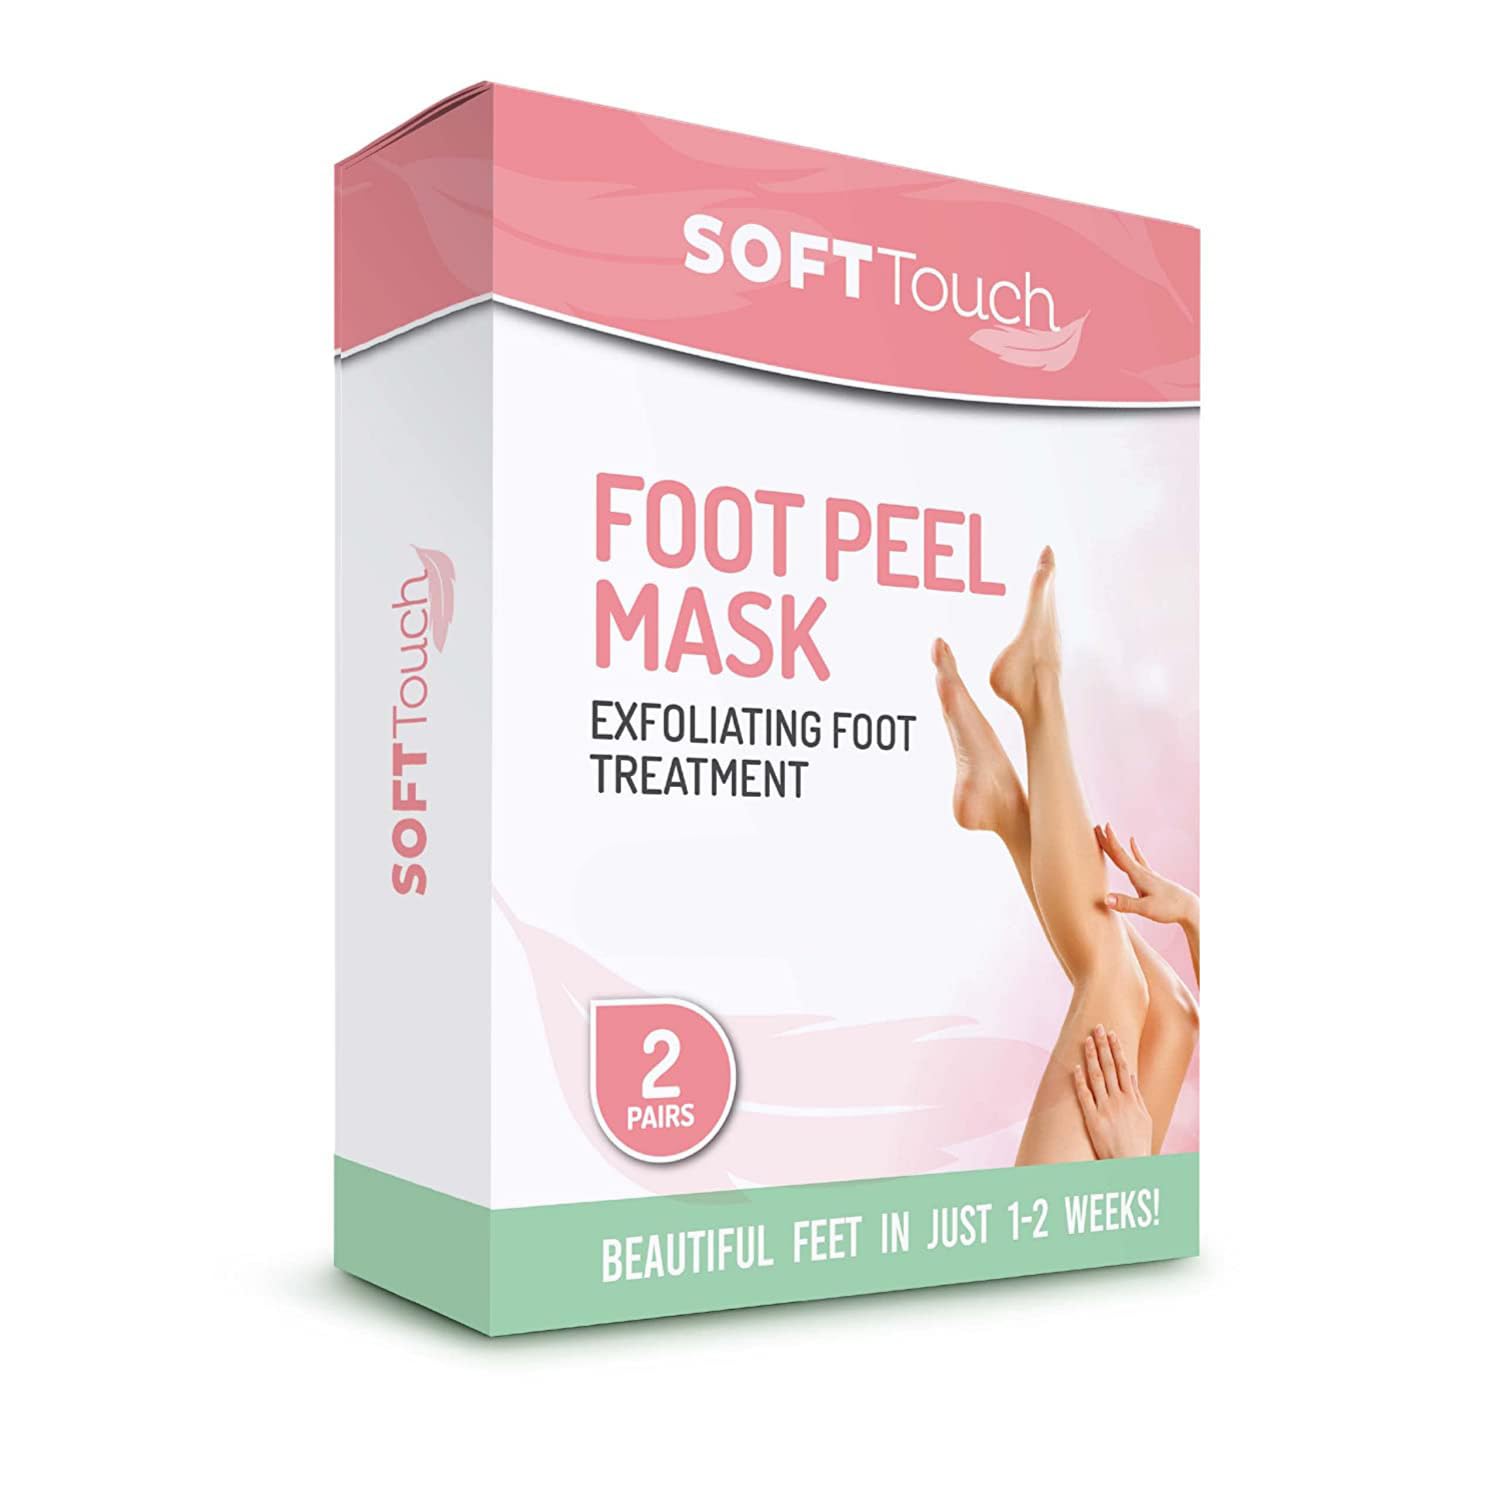 Soft Touch Foot Peel Mask - Pack of 2 Feet Peeling Masks for Dry, Cracked Heels & Calluses - Exfoliating Foot Mask Peel for Baby Soft Skin (Original)